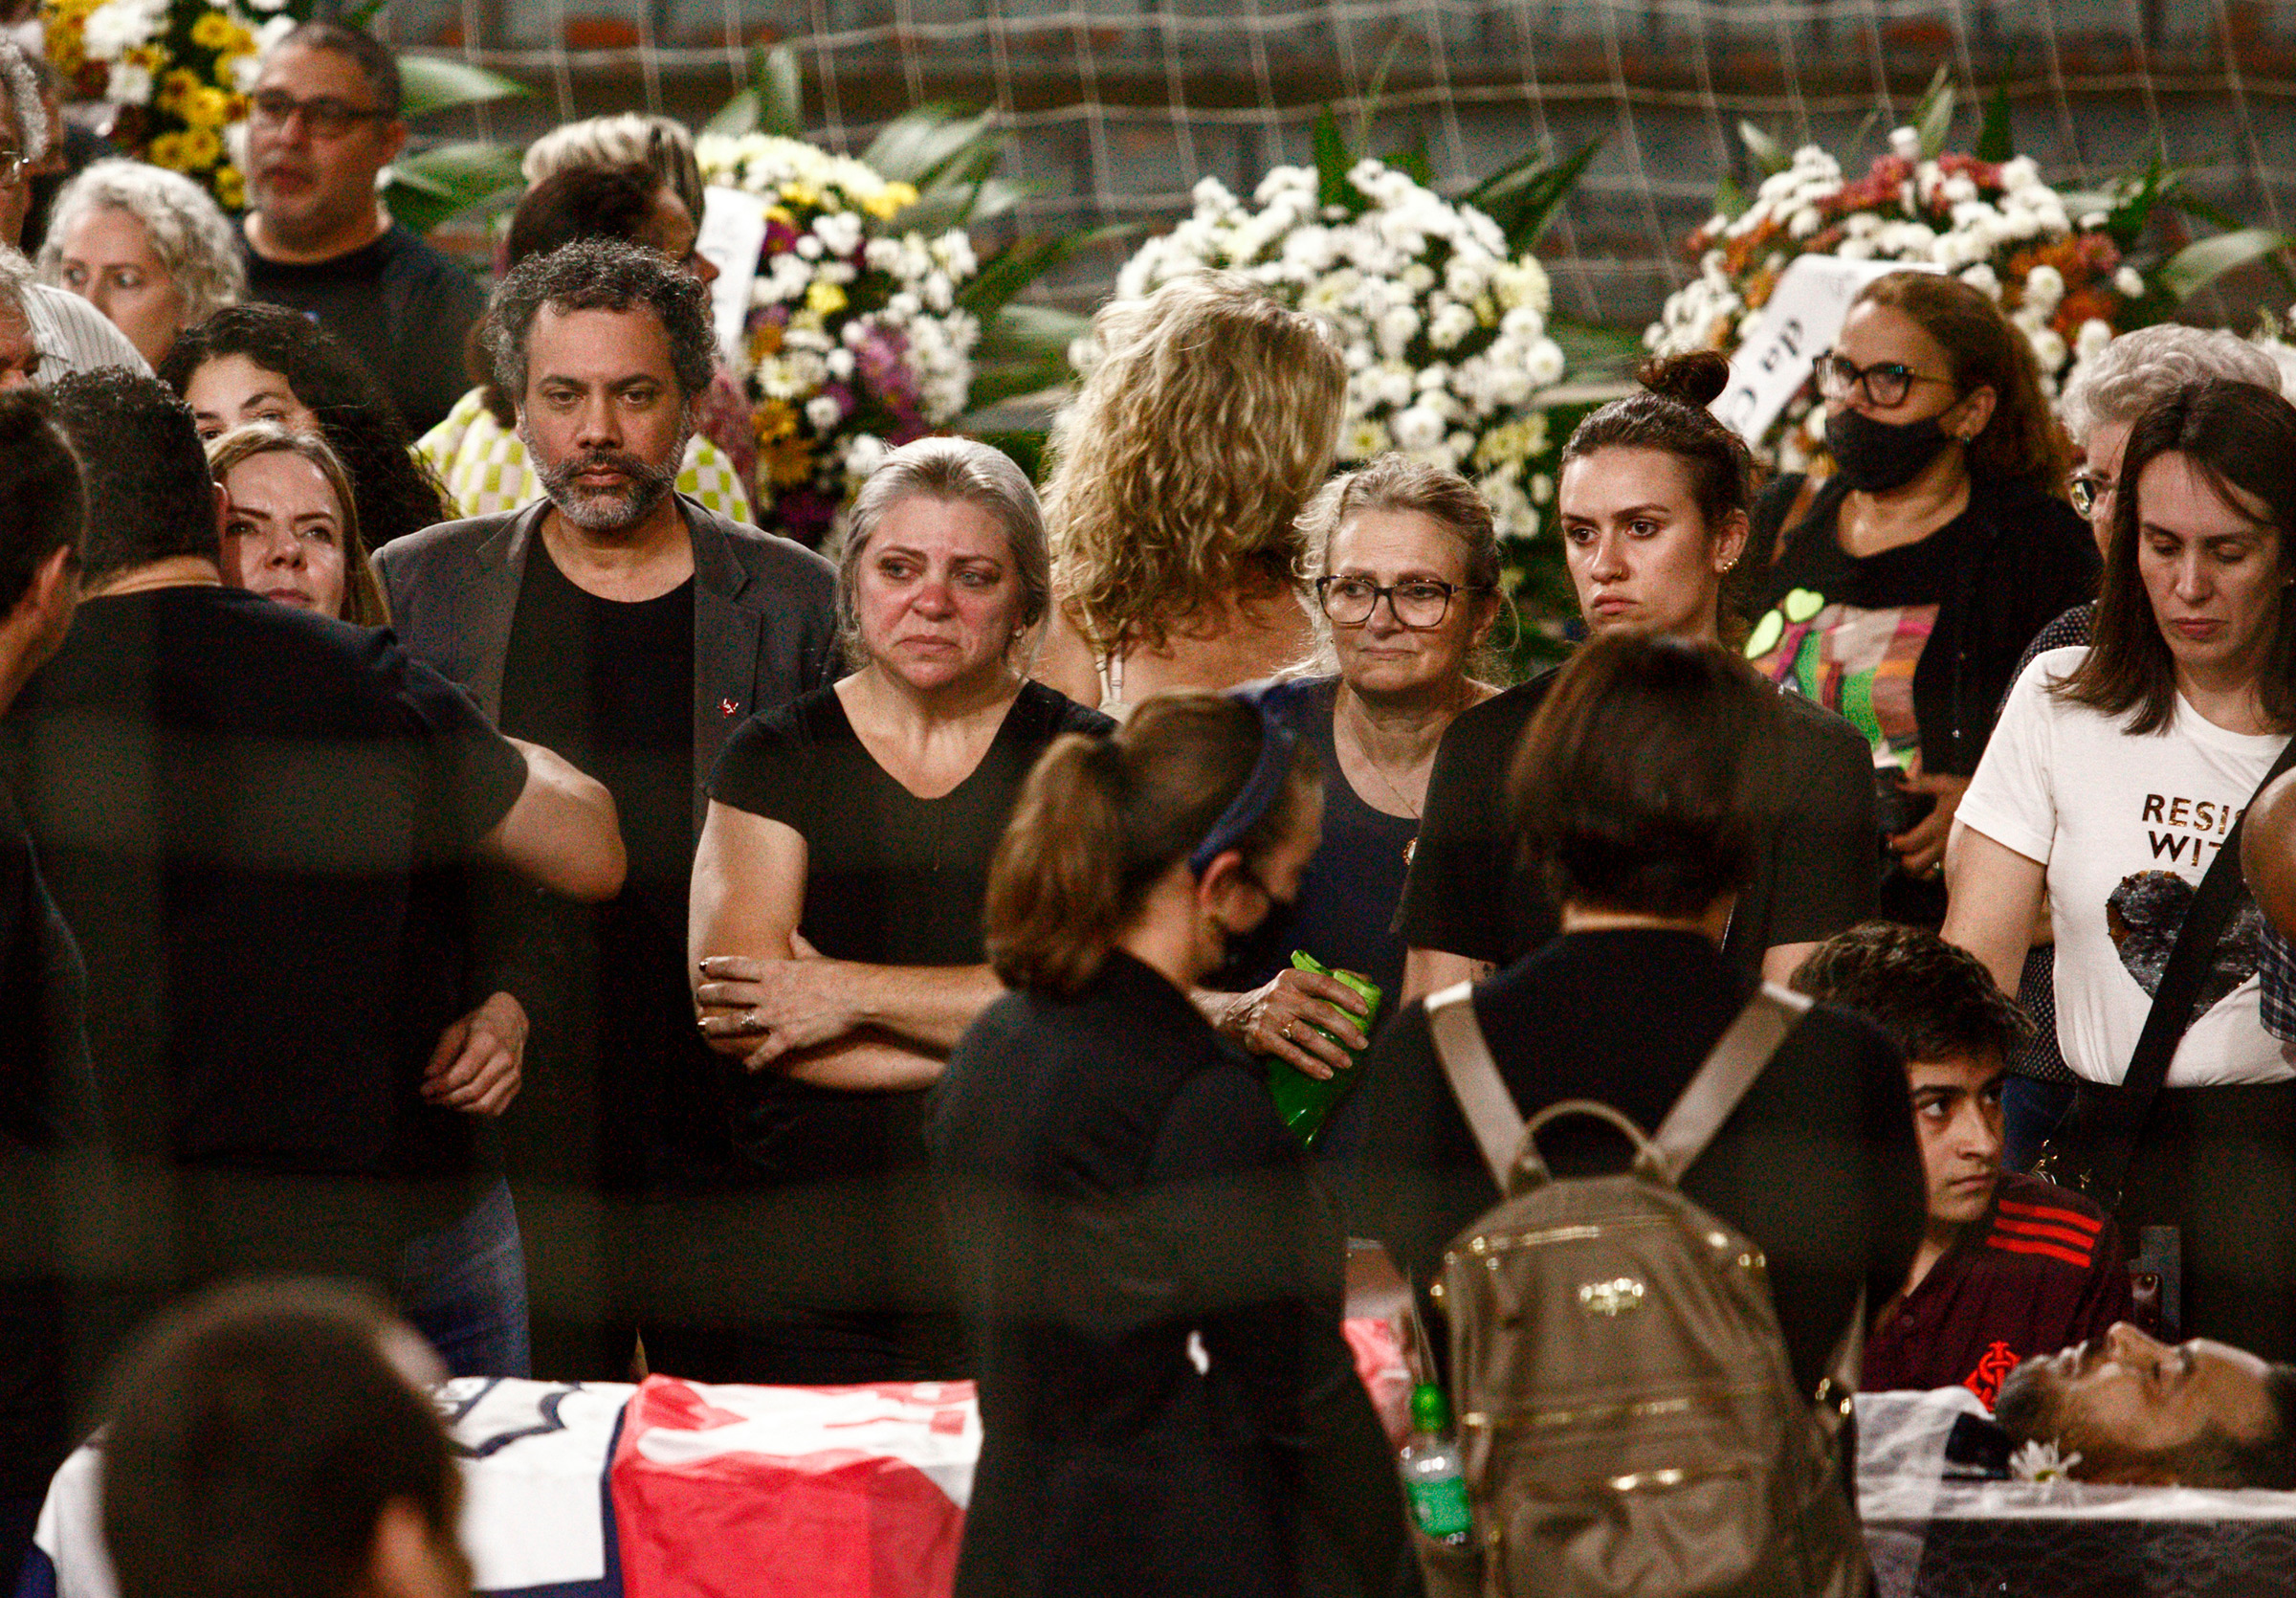 People attend the funeral of Marcelo Arruda held inside the Sebastiao Flores gymnasium in Foz do Iguacu, Brazil, July 10. An advocate of former Brazilian President Luiz Inacio Lula da Silva who is running for election, Arruda was shot dead at his birthday party. (Alexander Moschkowich—AP)